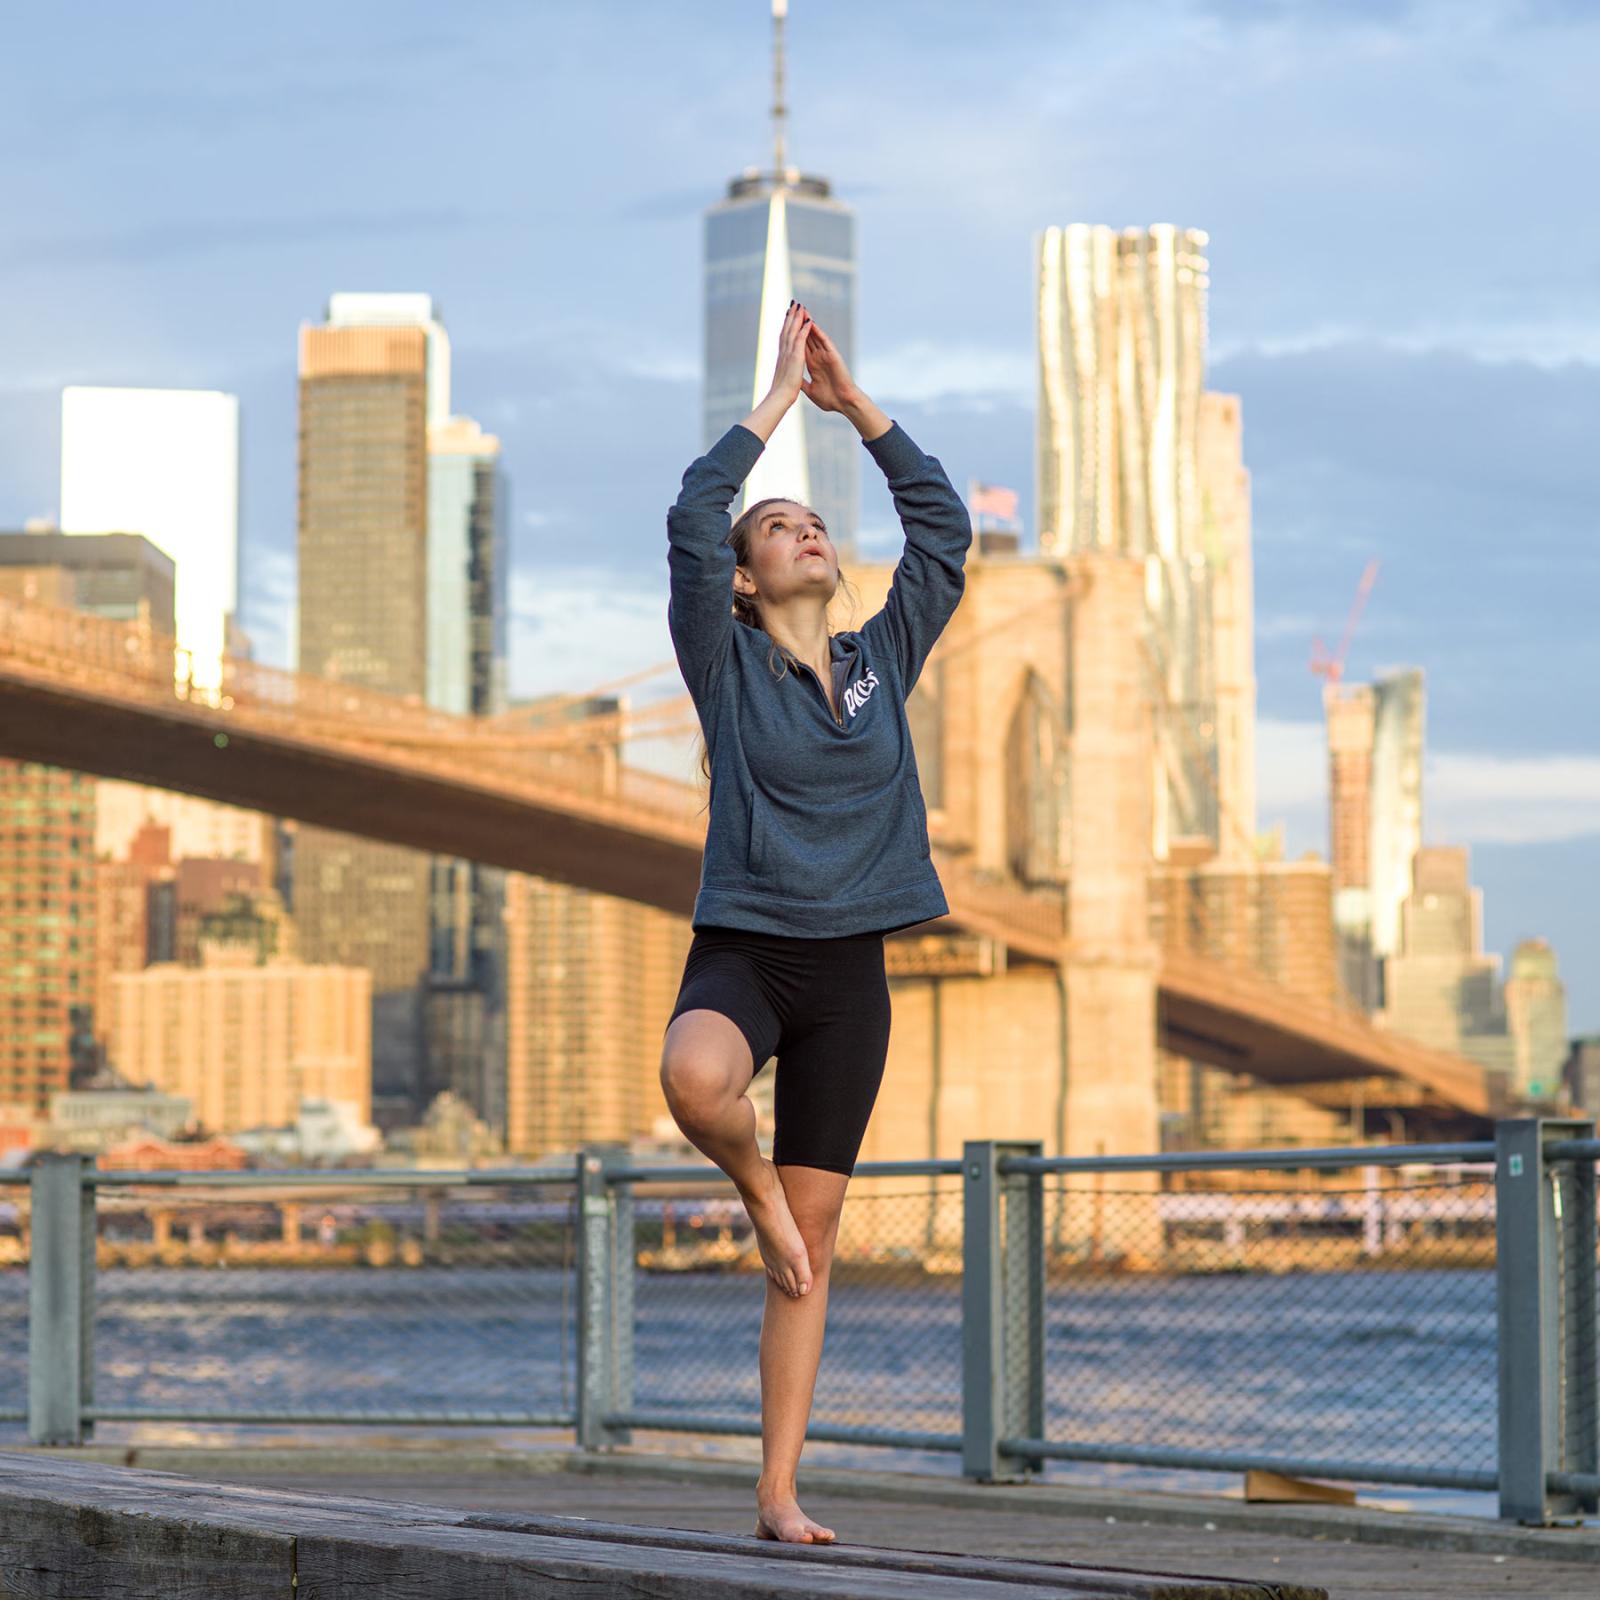 Pace university student doing yoga with the Brooklyn Bridge and New York City in the background